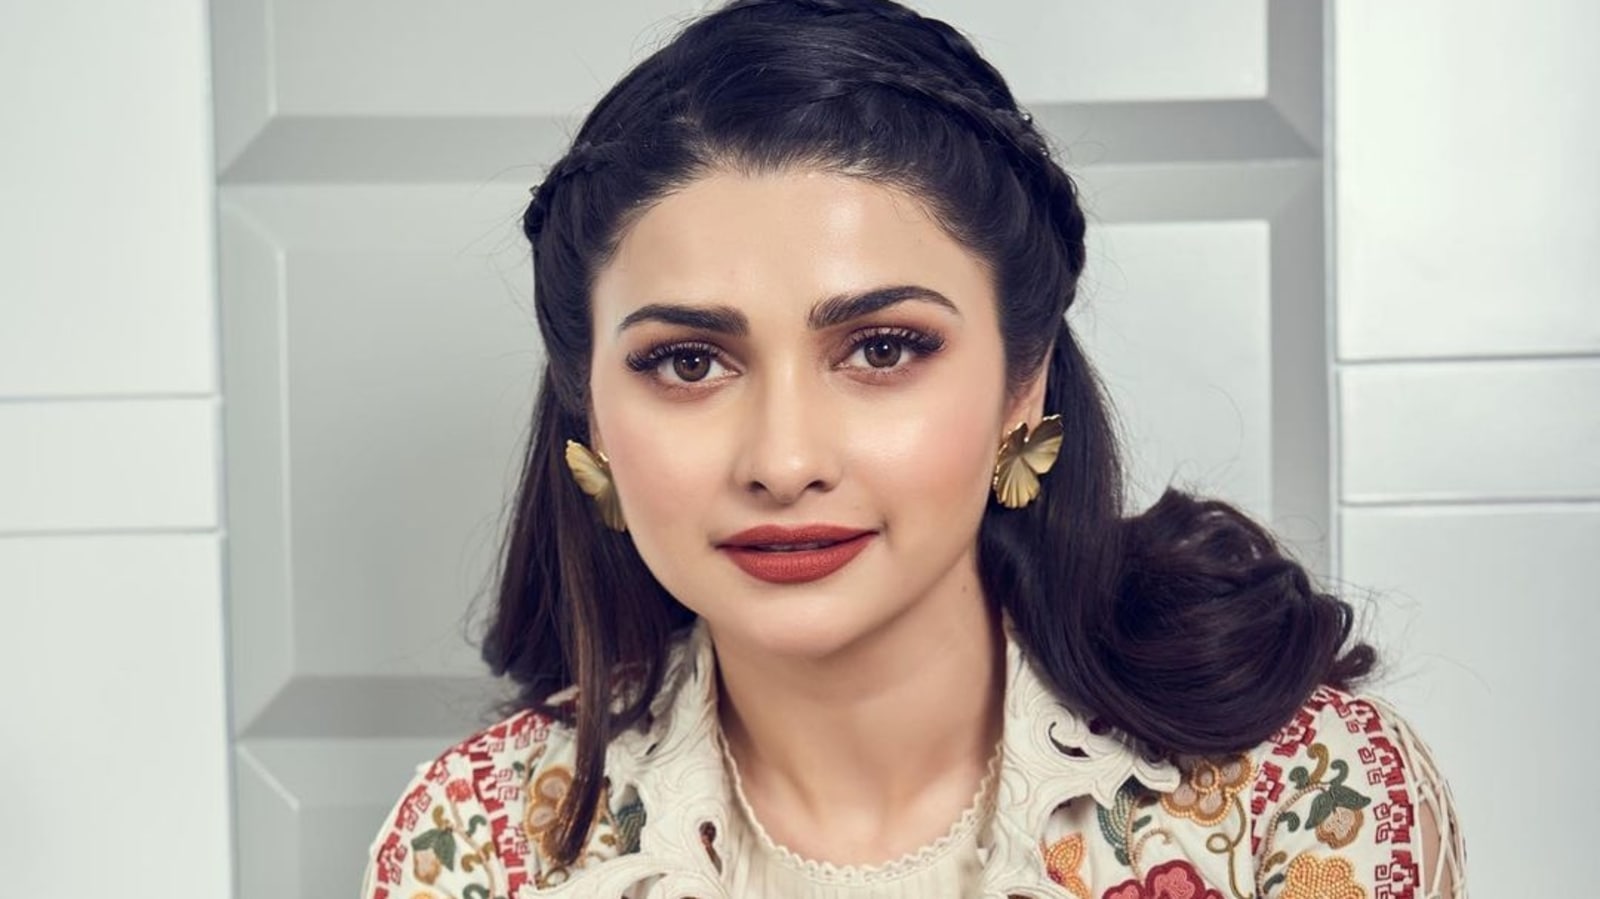 Prachi Sex - Prachi Desai shares casting couch experience, says it was a 'big film' and  director called her even after she said no | Bollywood - Hindustan Times